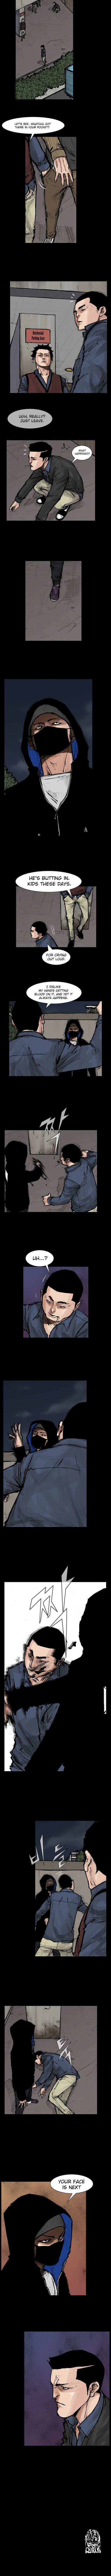 Dokgo 2 Chapter 48 Page 33